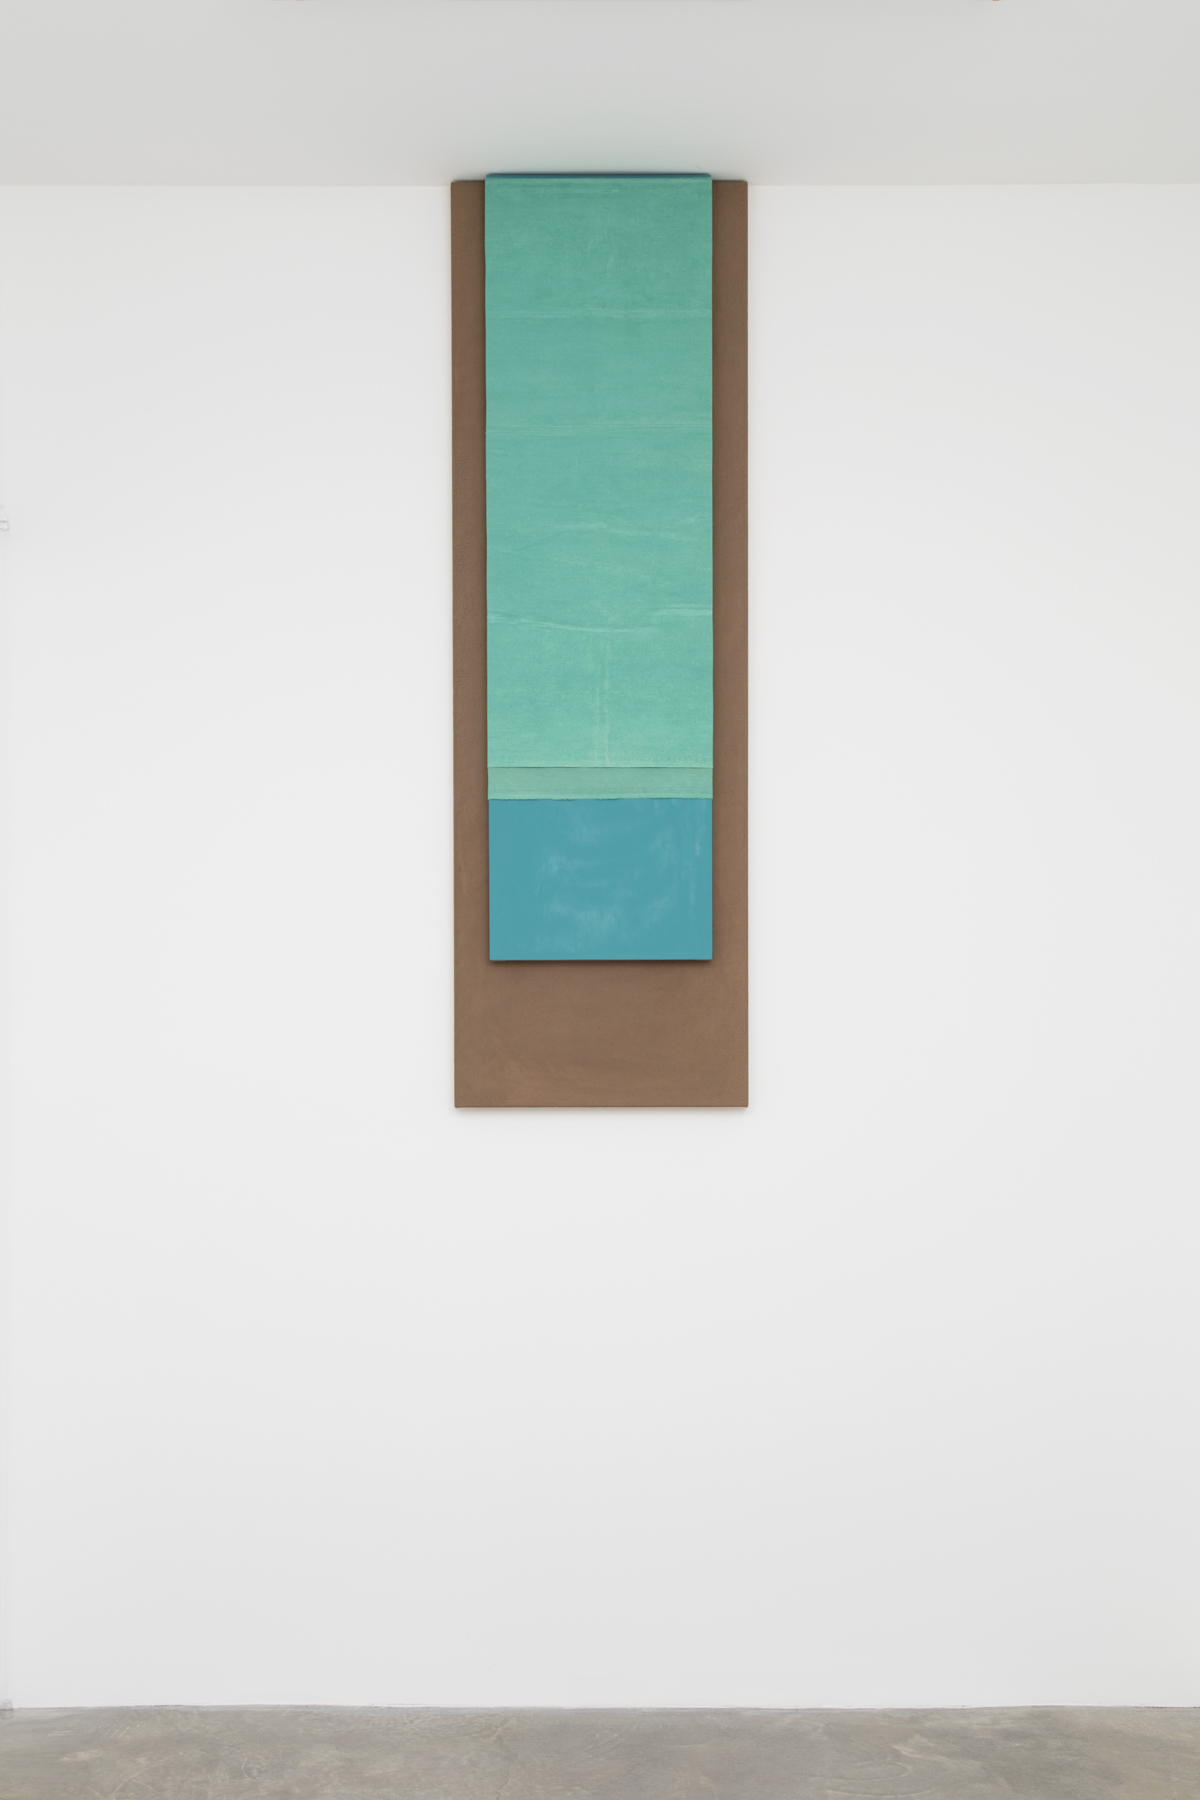 N. Dash, Untitled, 2017, adobe, oil, pigment, acrylic, linen, jute, wood support, photo Jean Vong, Courtesy the artist, Casey Kaplan Gallery, New York, and Mehdi Chouakri, Berlin